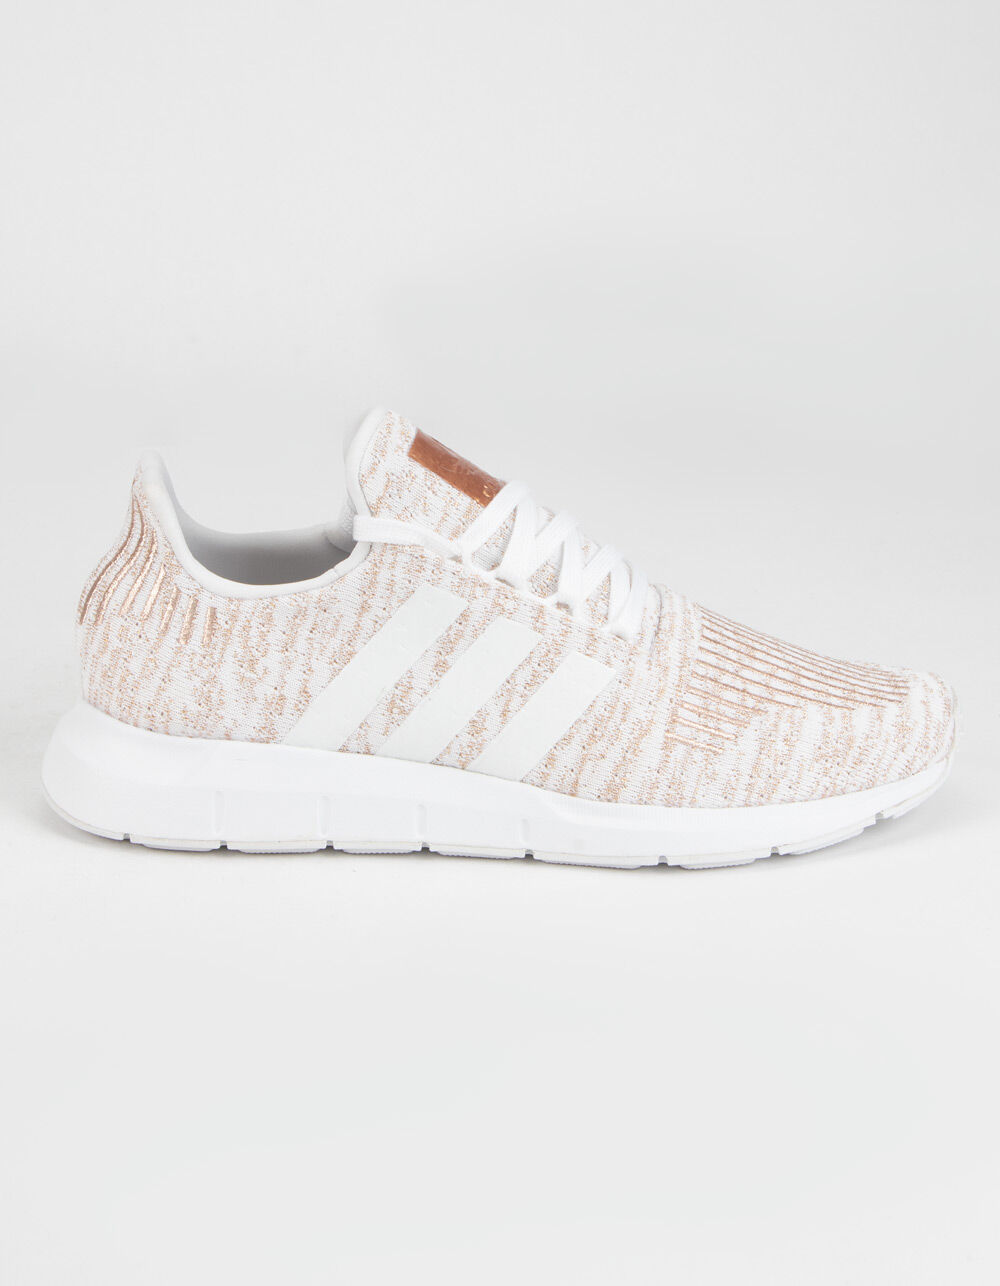 strong delinquency Performance ADIDAS Swift Run White & Rose Gold Womens Shoes - WHITE COMBO | Tillys